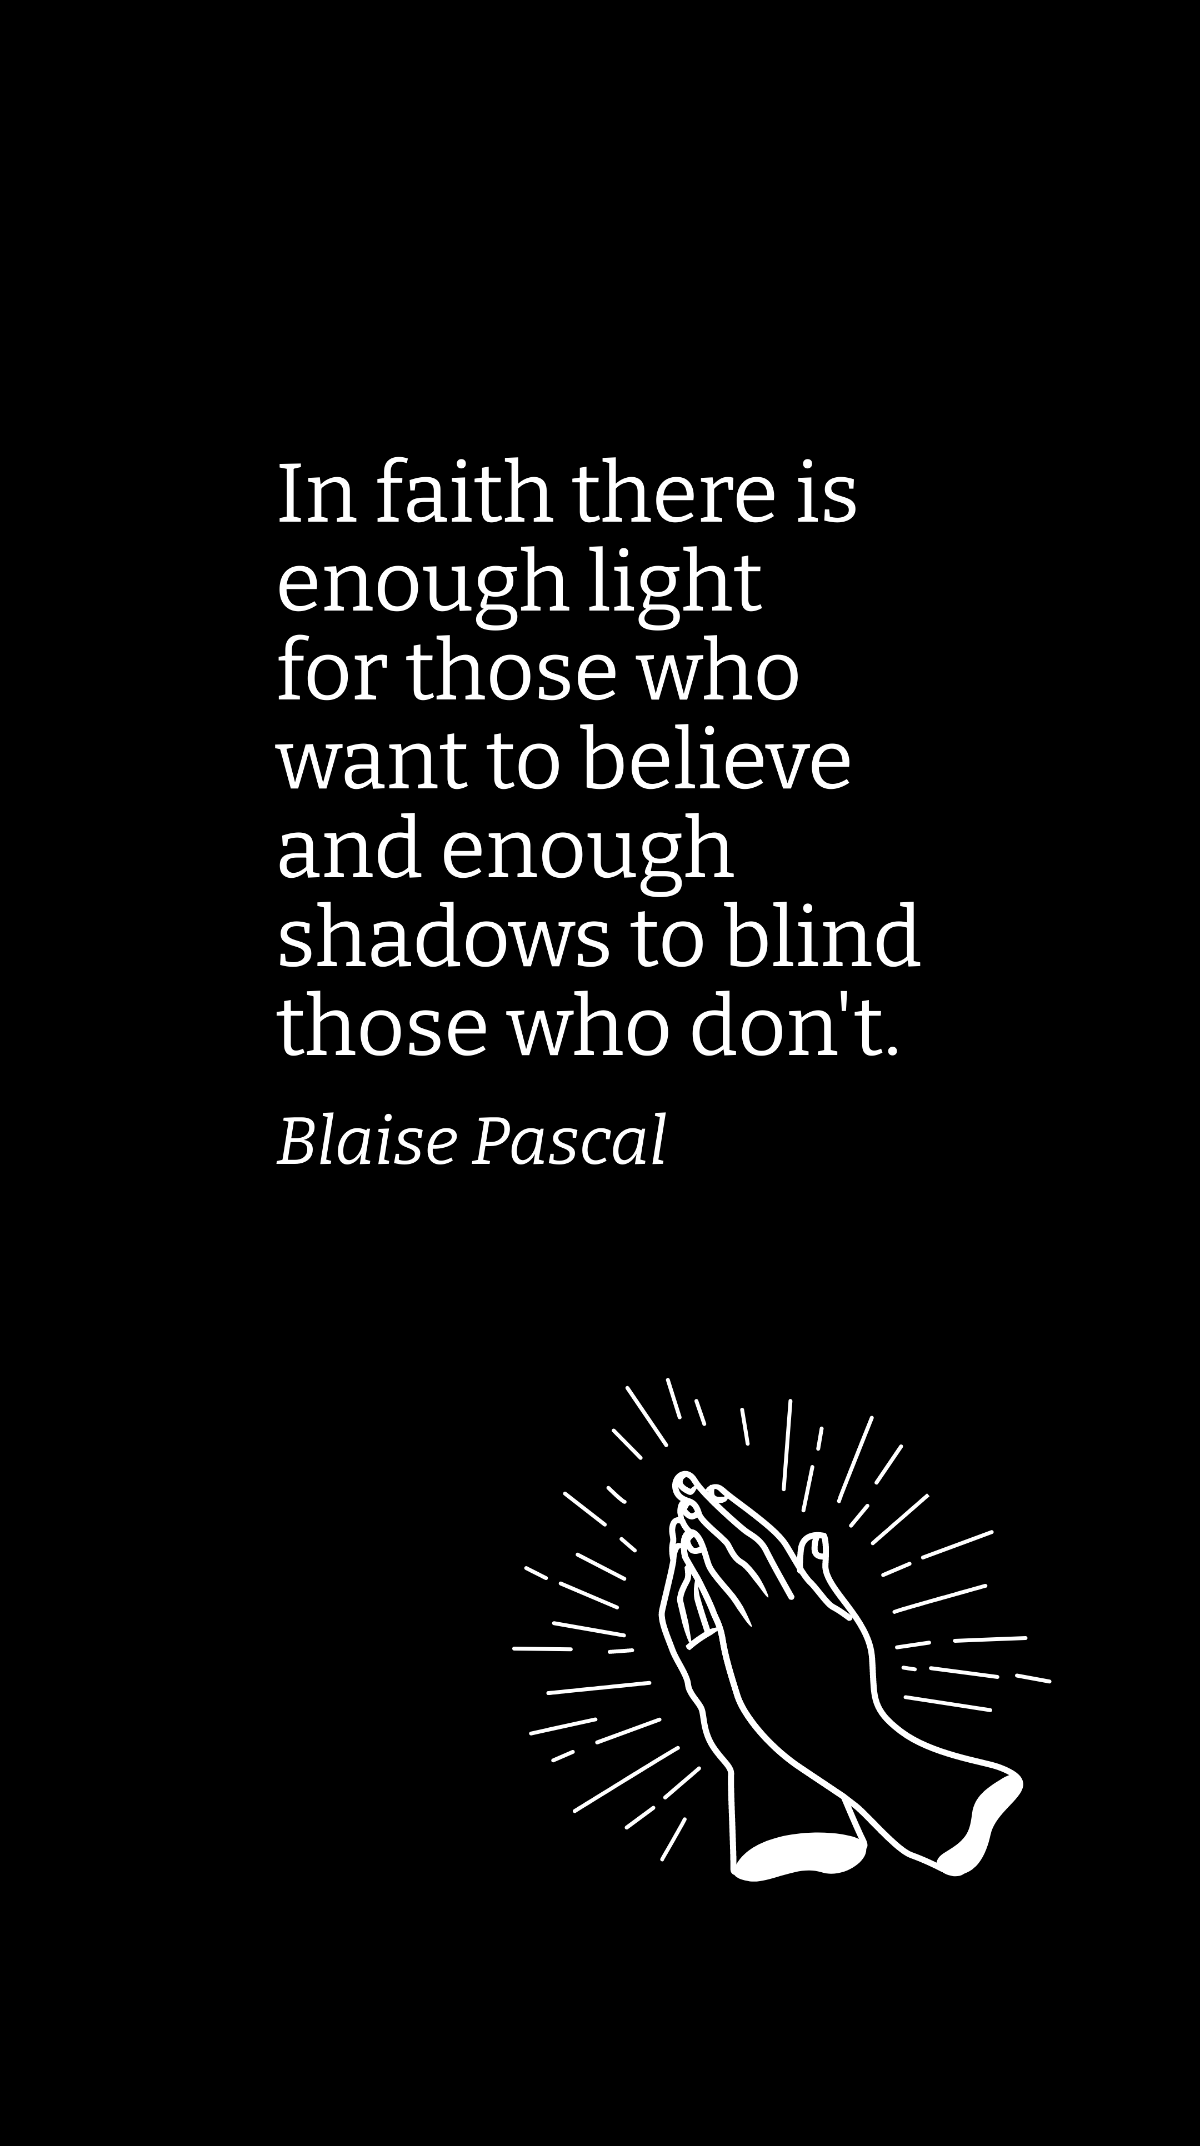 Free Blaise Pascal - In faith there is enough light for those who want to believe and enough shadows to blind those who don't. Template